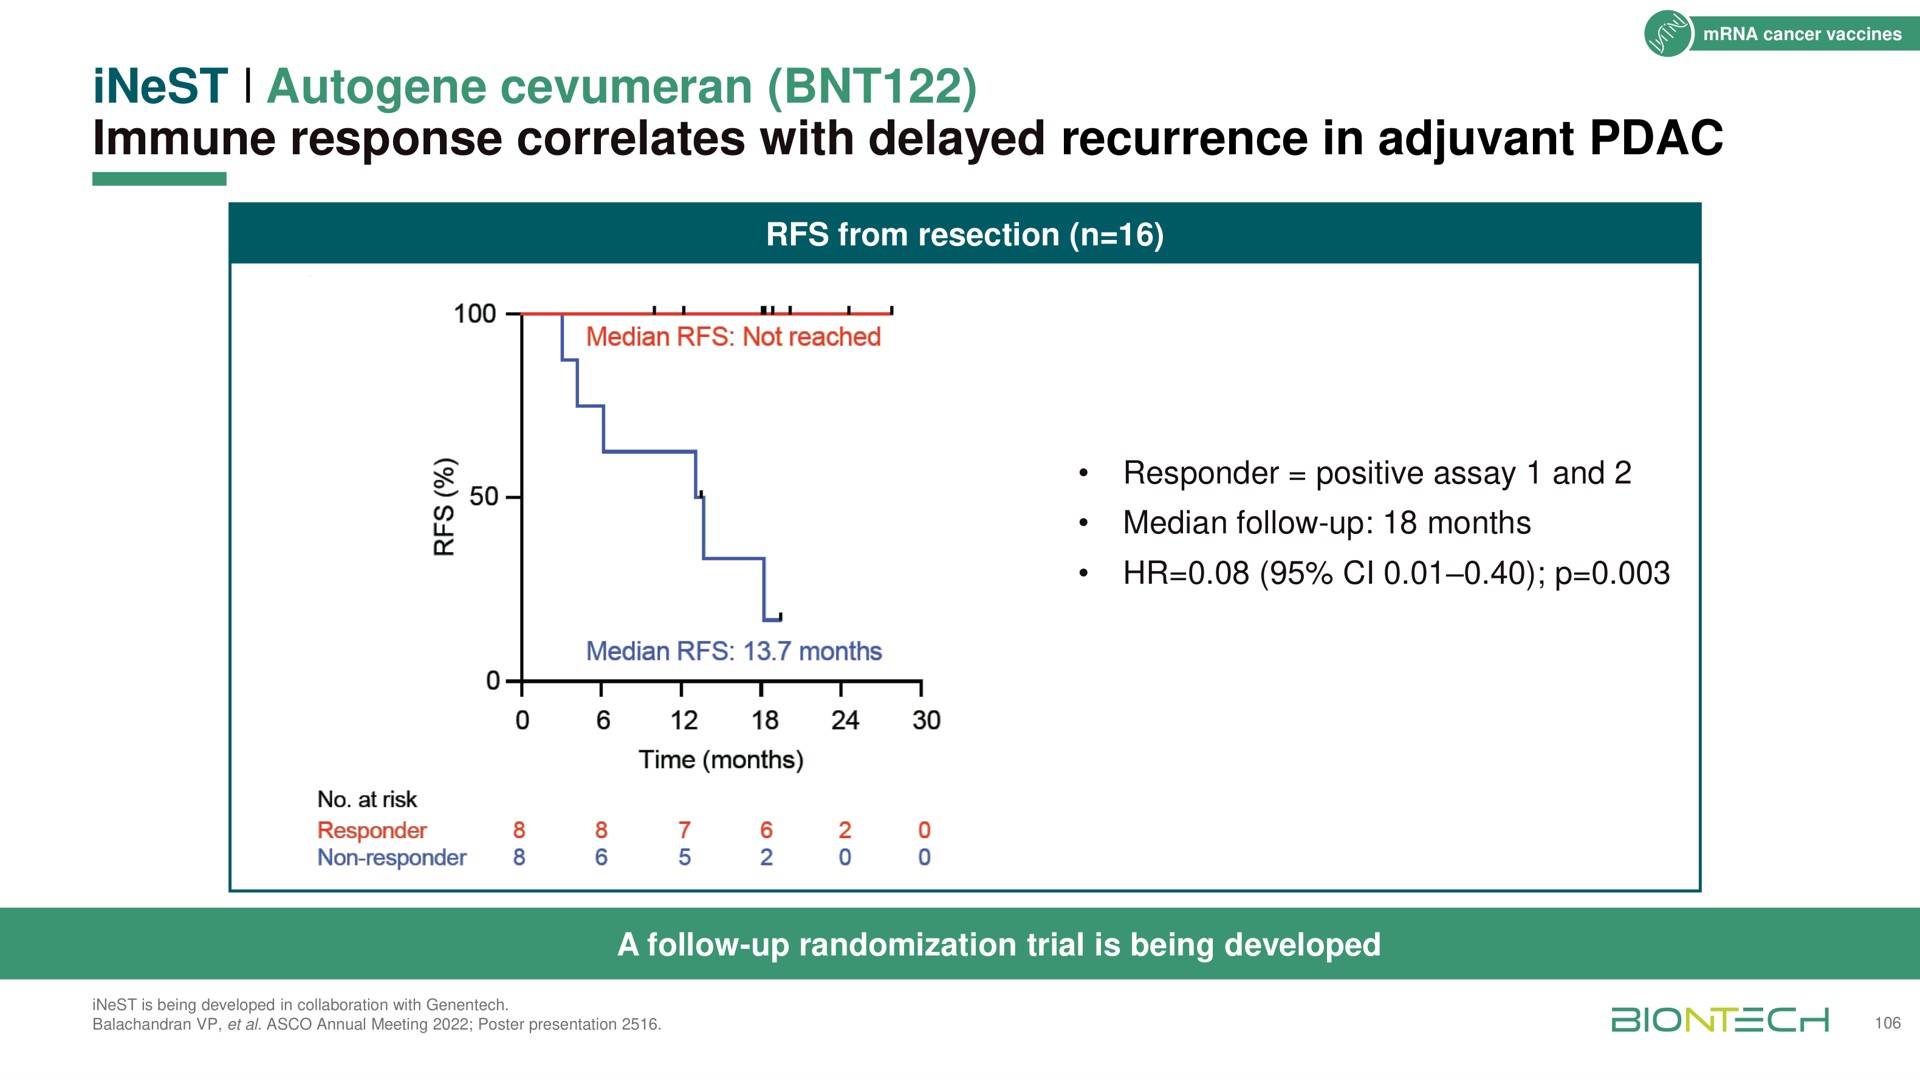 immune response correlates with delayed recurrence in adjuvant gee | BioNTech